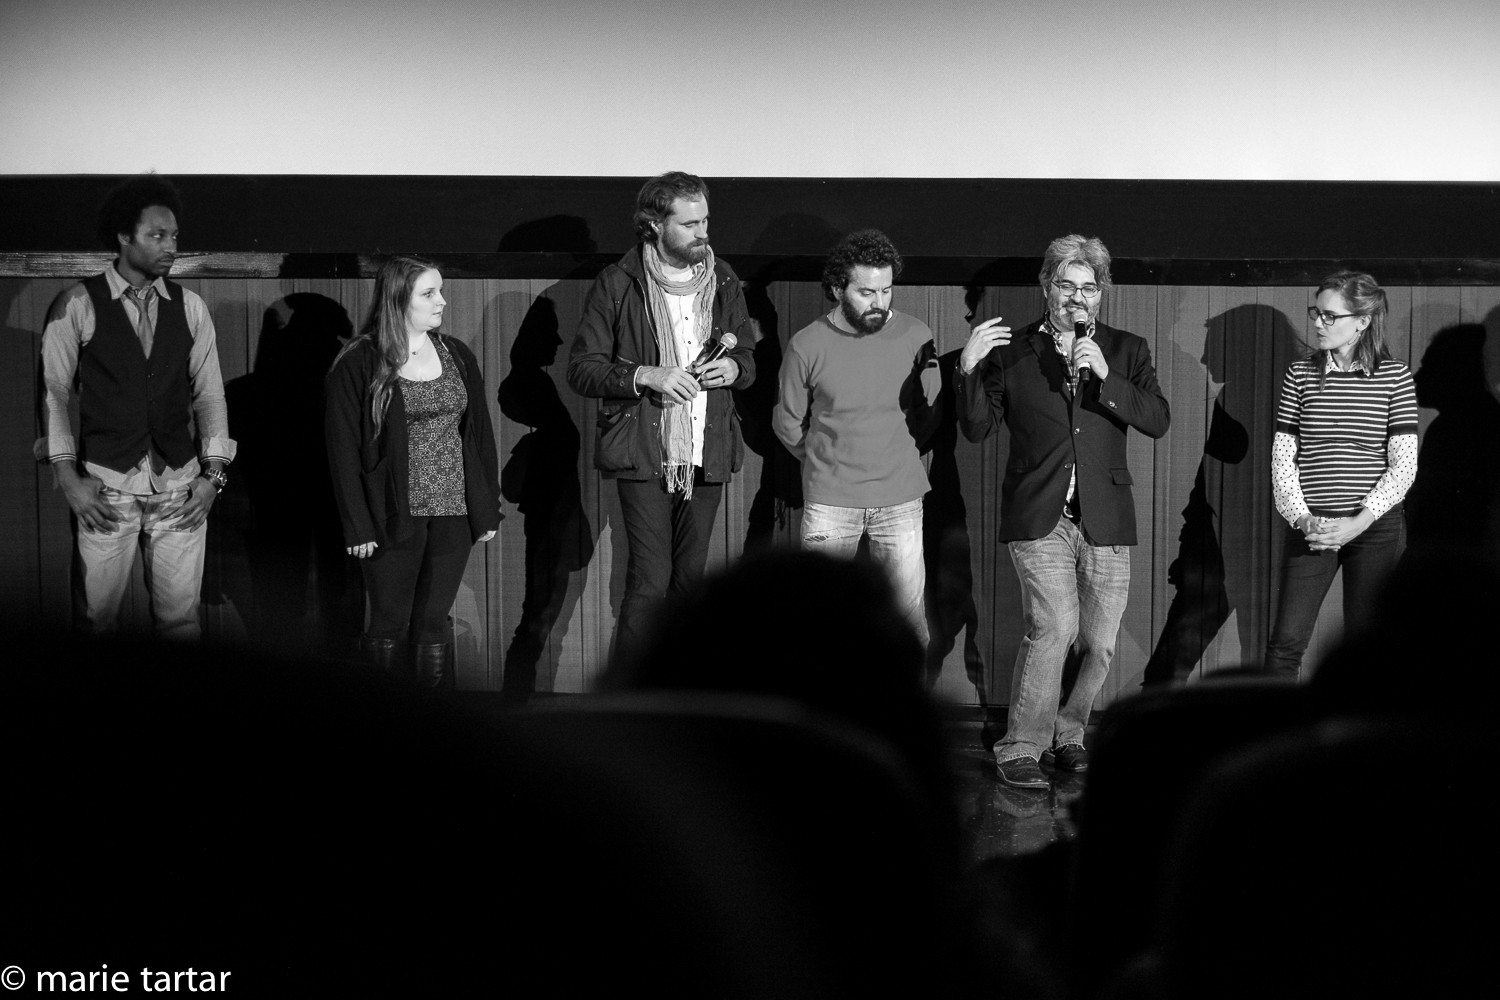 Writer, director and actor Tukel (2cd from right) fields questions from the audience after the screening of "Applesauce" at the Tribeca Film Festival, accompanied by 4 other actors from the film and an intern (2cd from left).